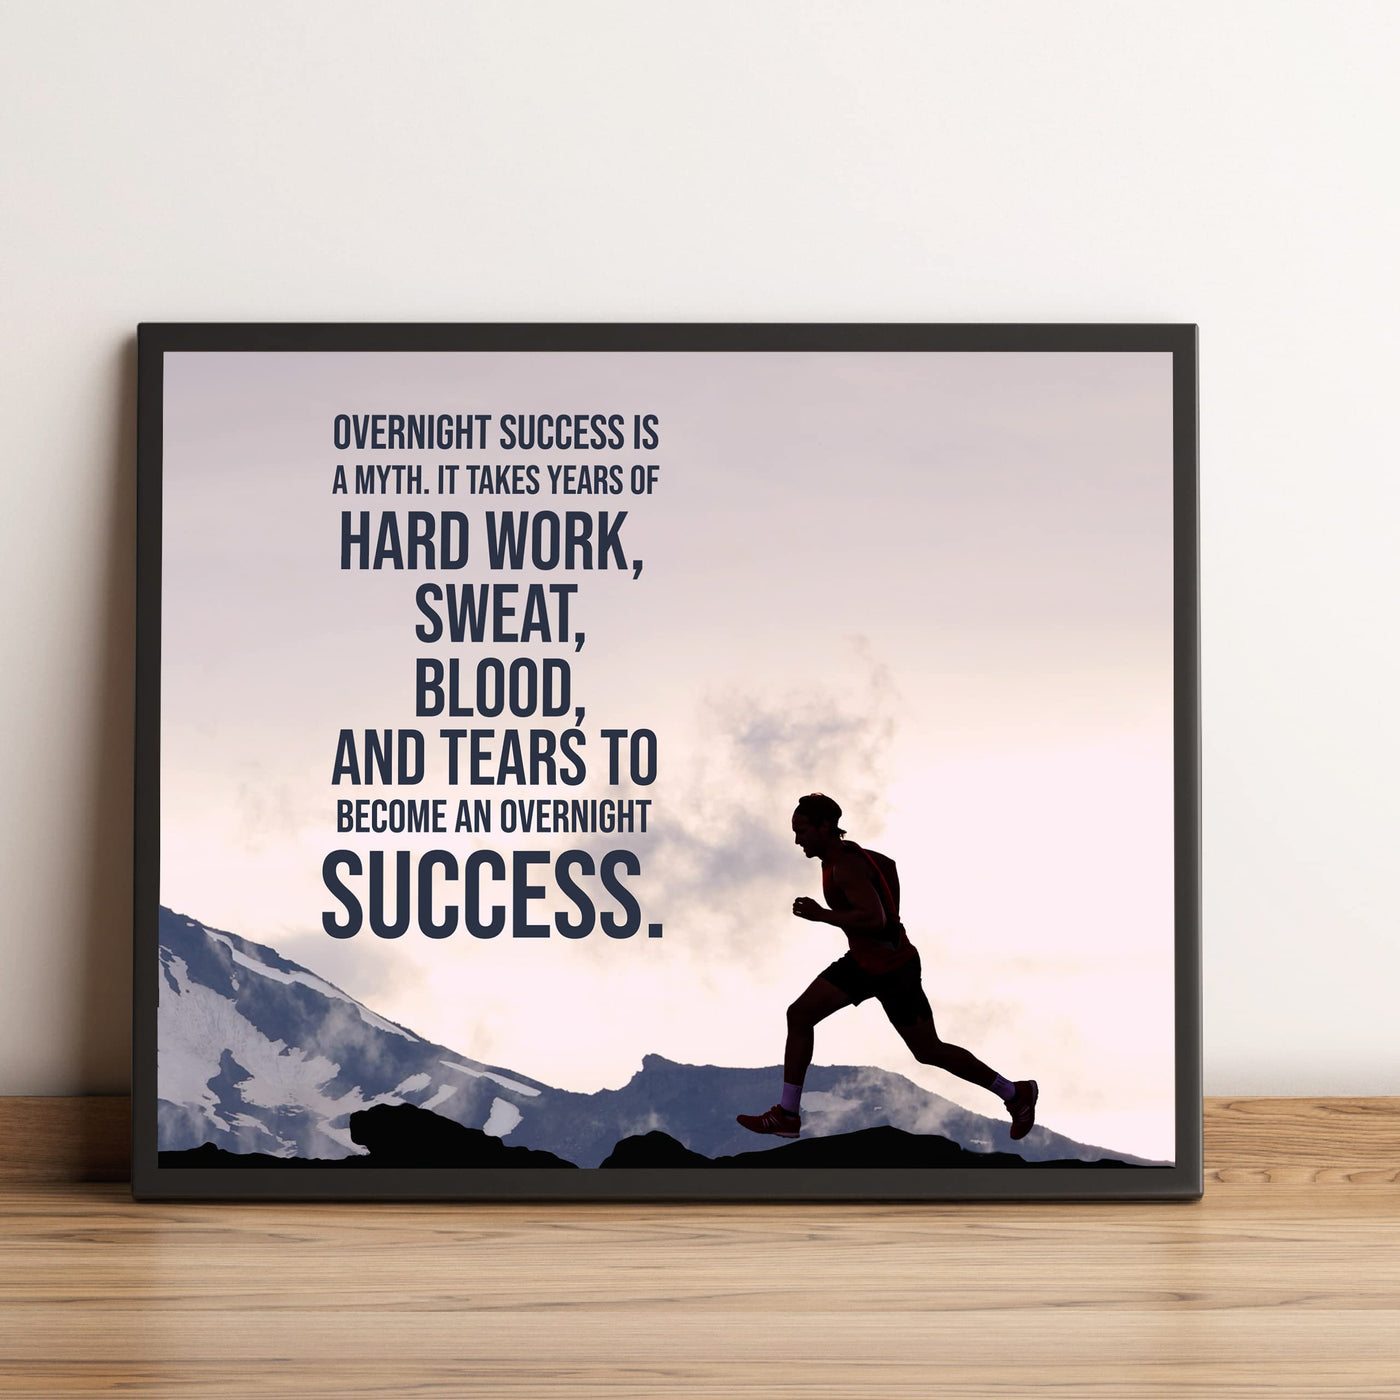 Overnight Success Is a Myth Motivational Exercise & Fitness Print Wall Art -10 x 8" Inspirational Sports Print -Ready to Frame. Perfect Home-School-Office-Gym-Locker Room Decor. Great Gift!